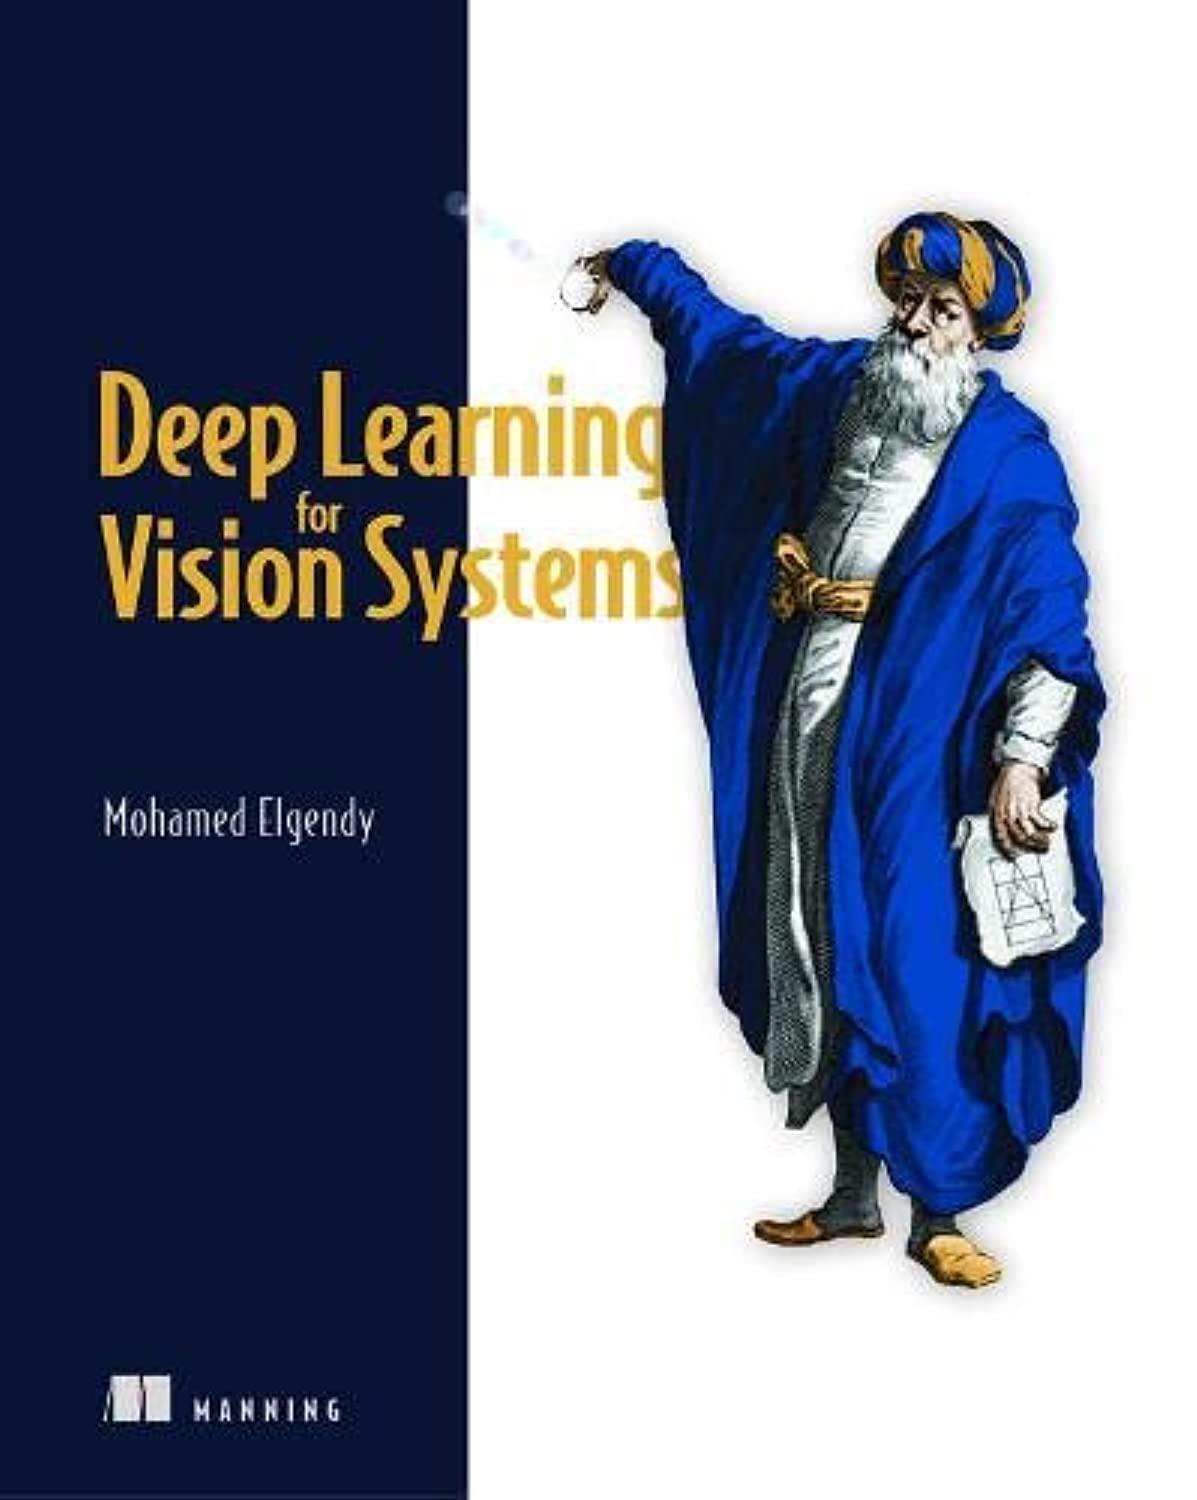 deep learning for vision systems 1st edition mohamed elgendy 1617296198, 978-1617296192